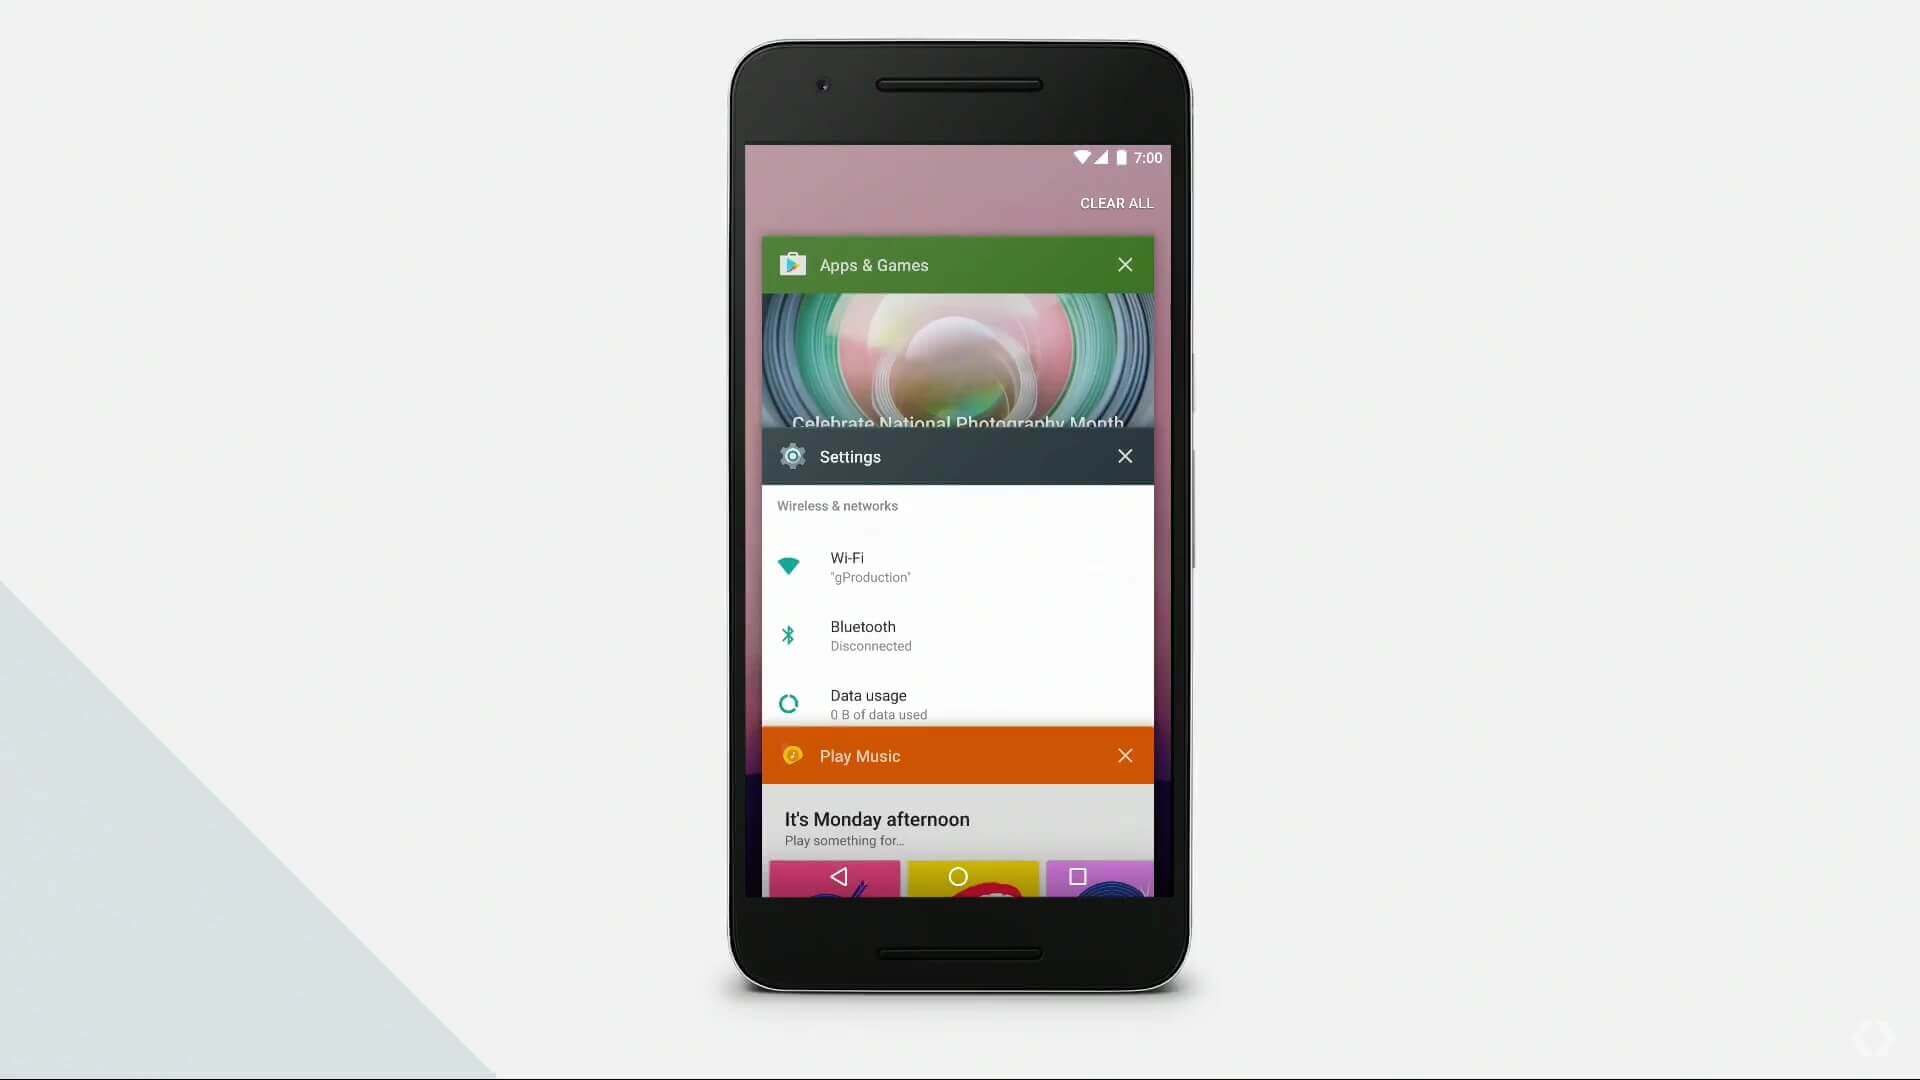 OS Android N